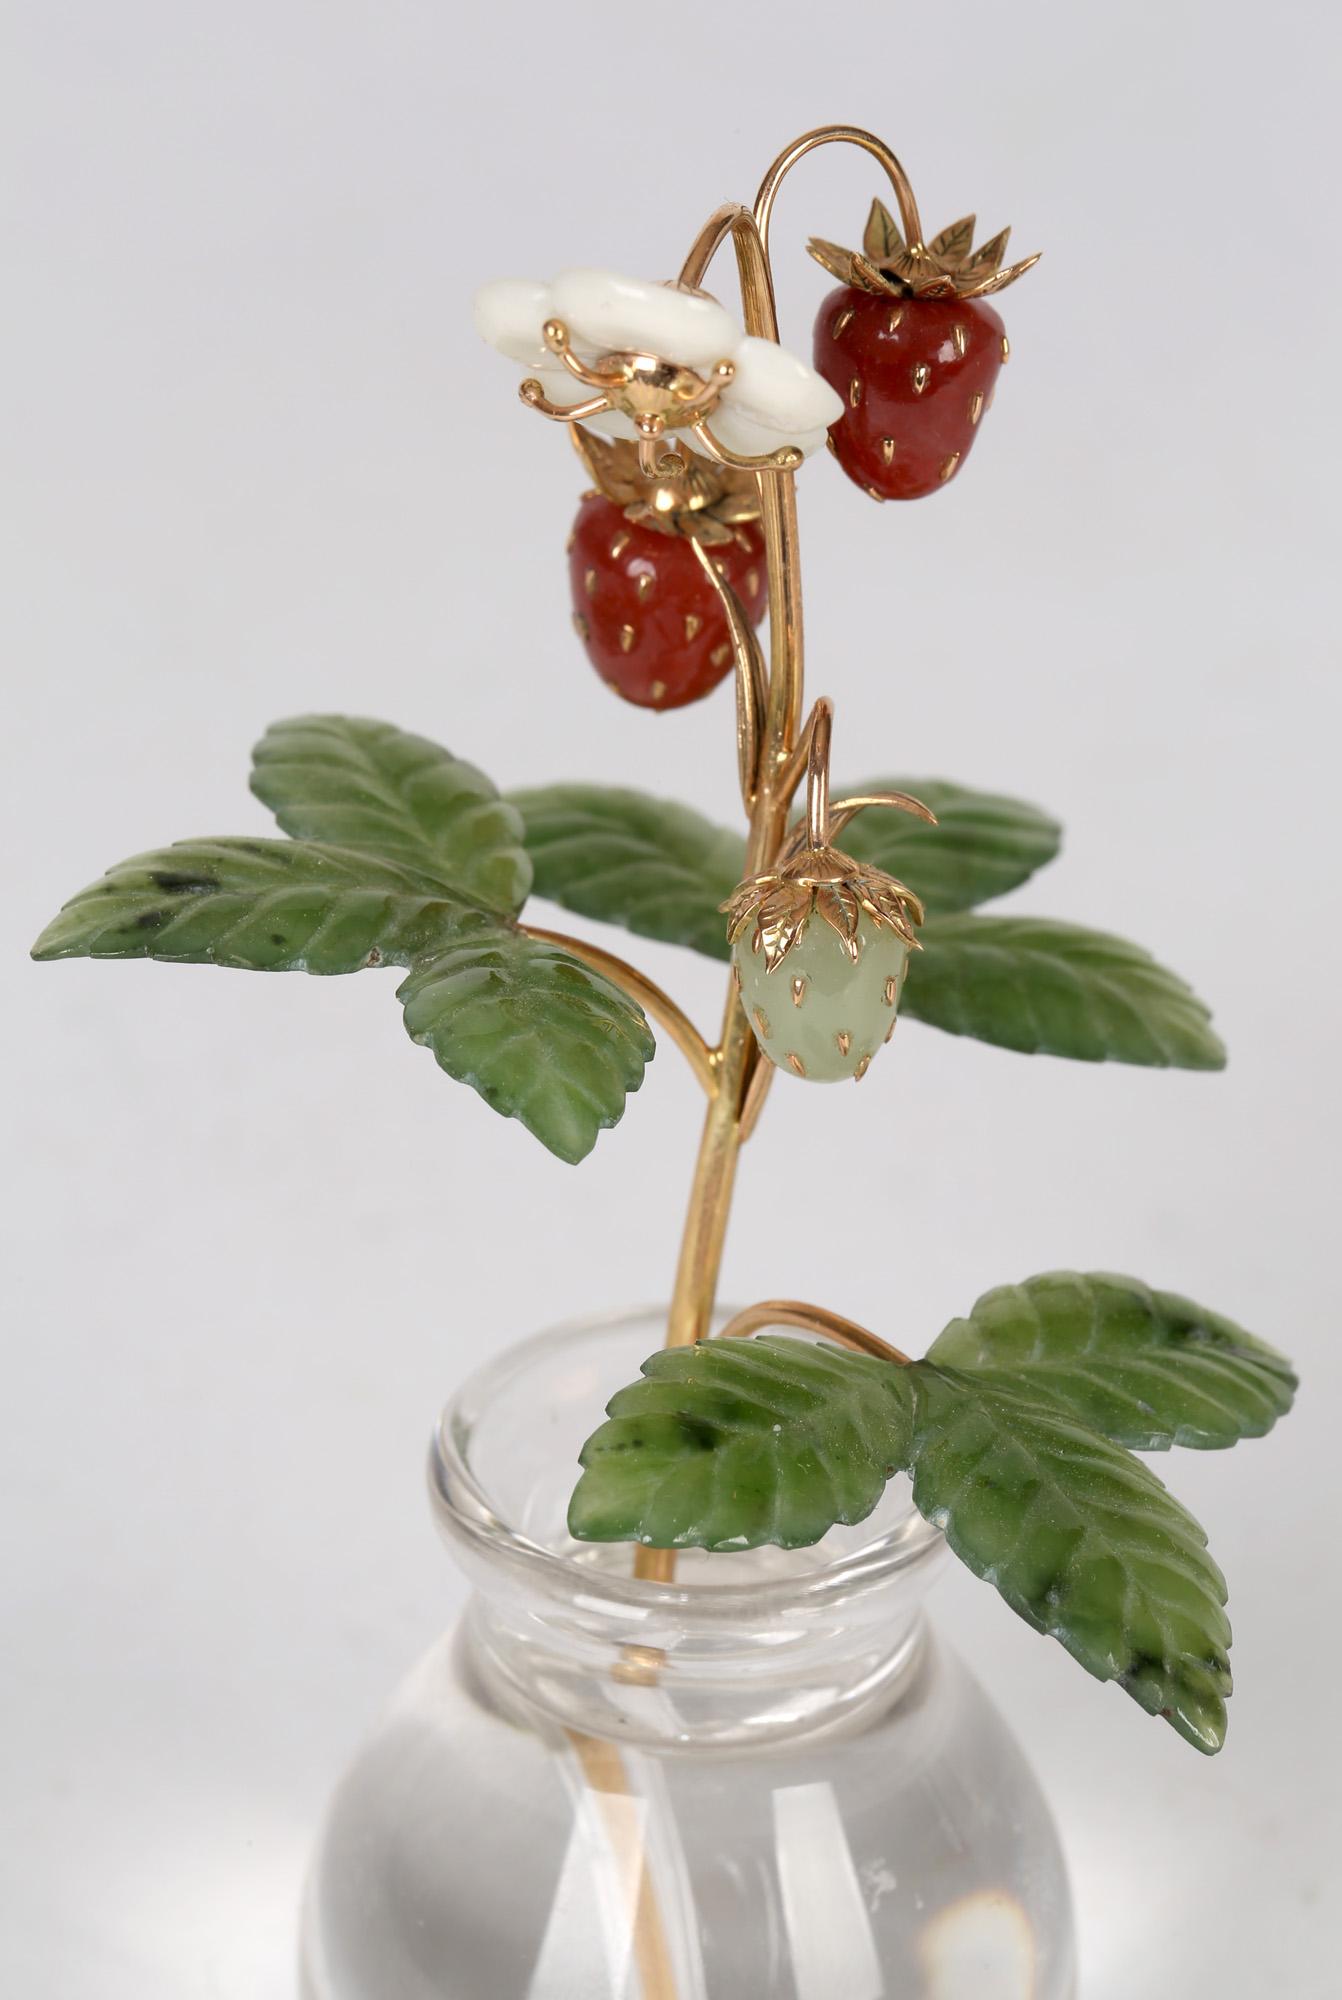 An exquisite Russian gold stemmed wild strawberry mounted in a clear crystal vase in the style of renowned Russian jeweller Peter Karl Fabergé (1864-1920) and believed to date from the early to mid 20th century. The stem is mounted with three leaves